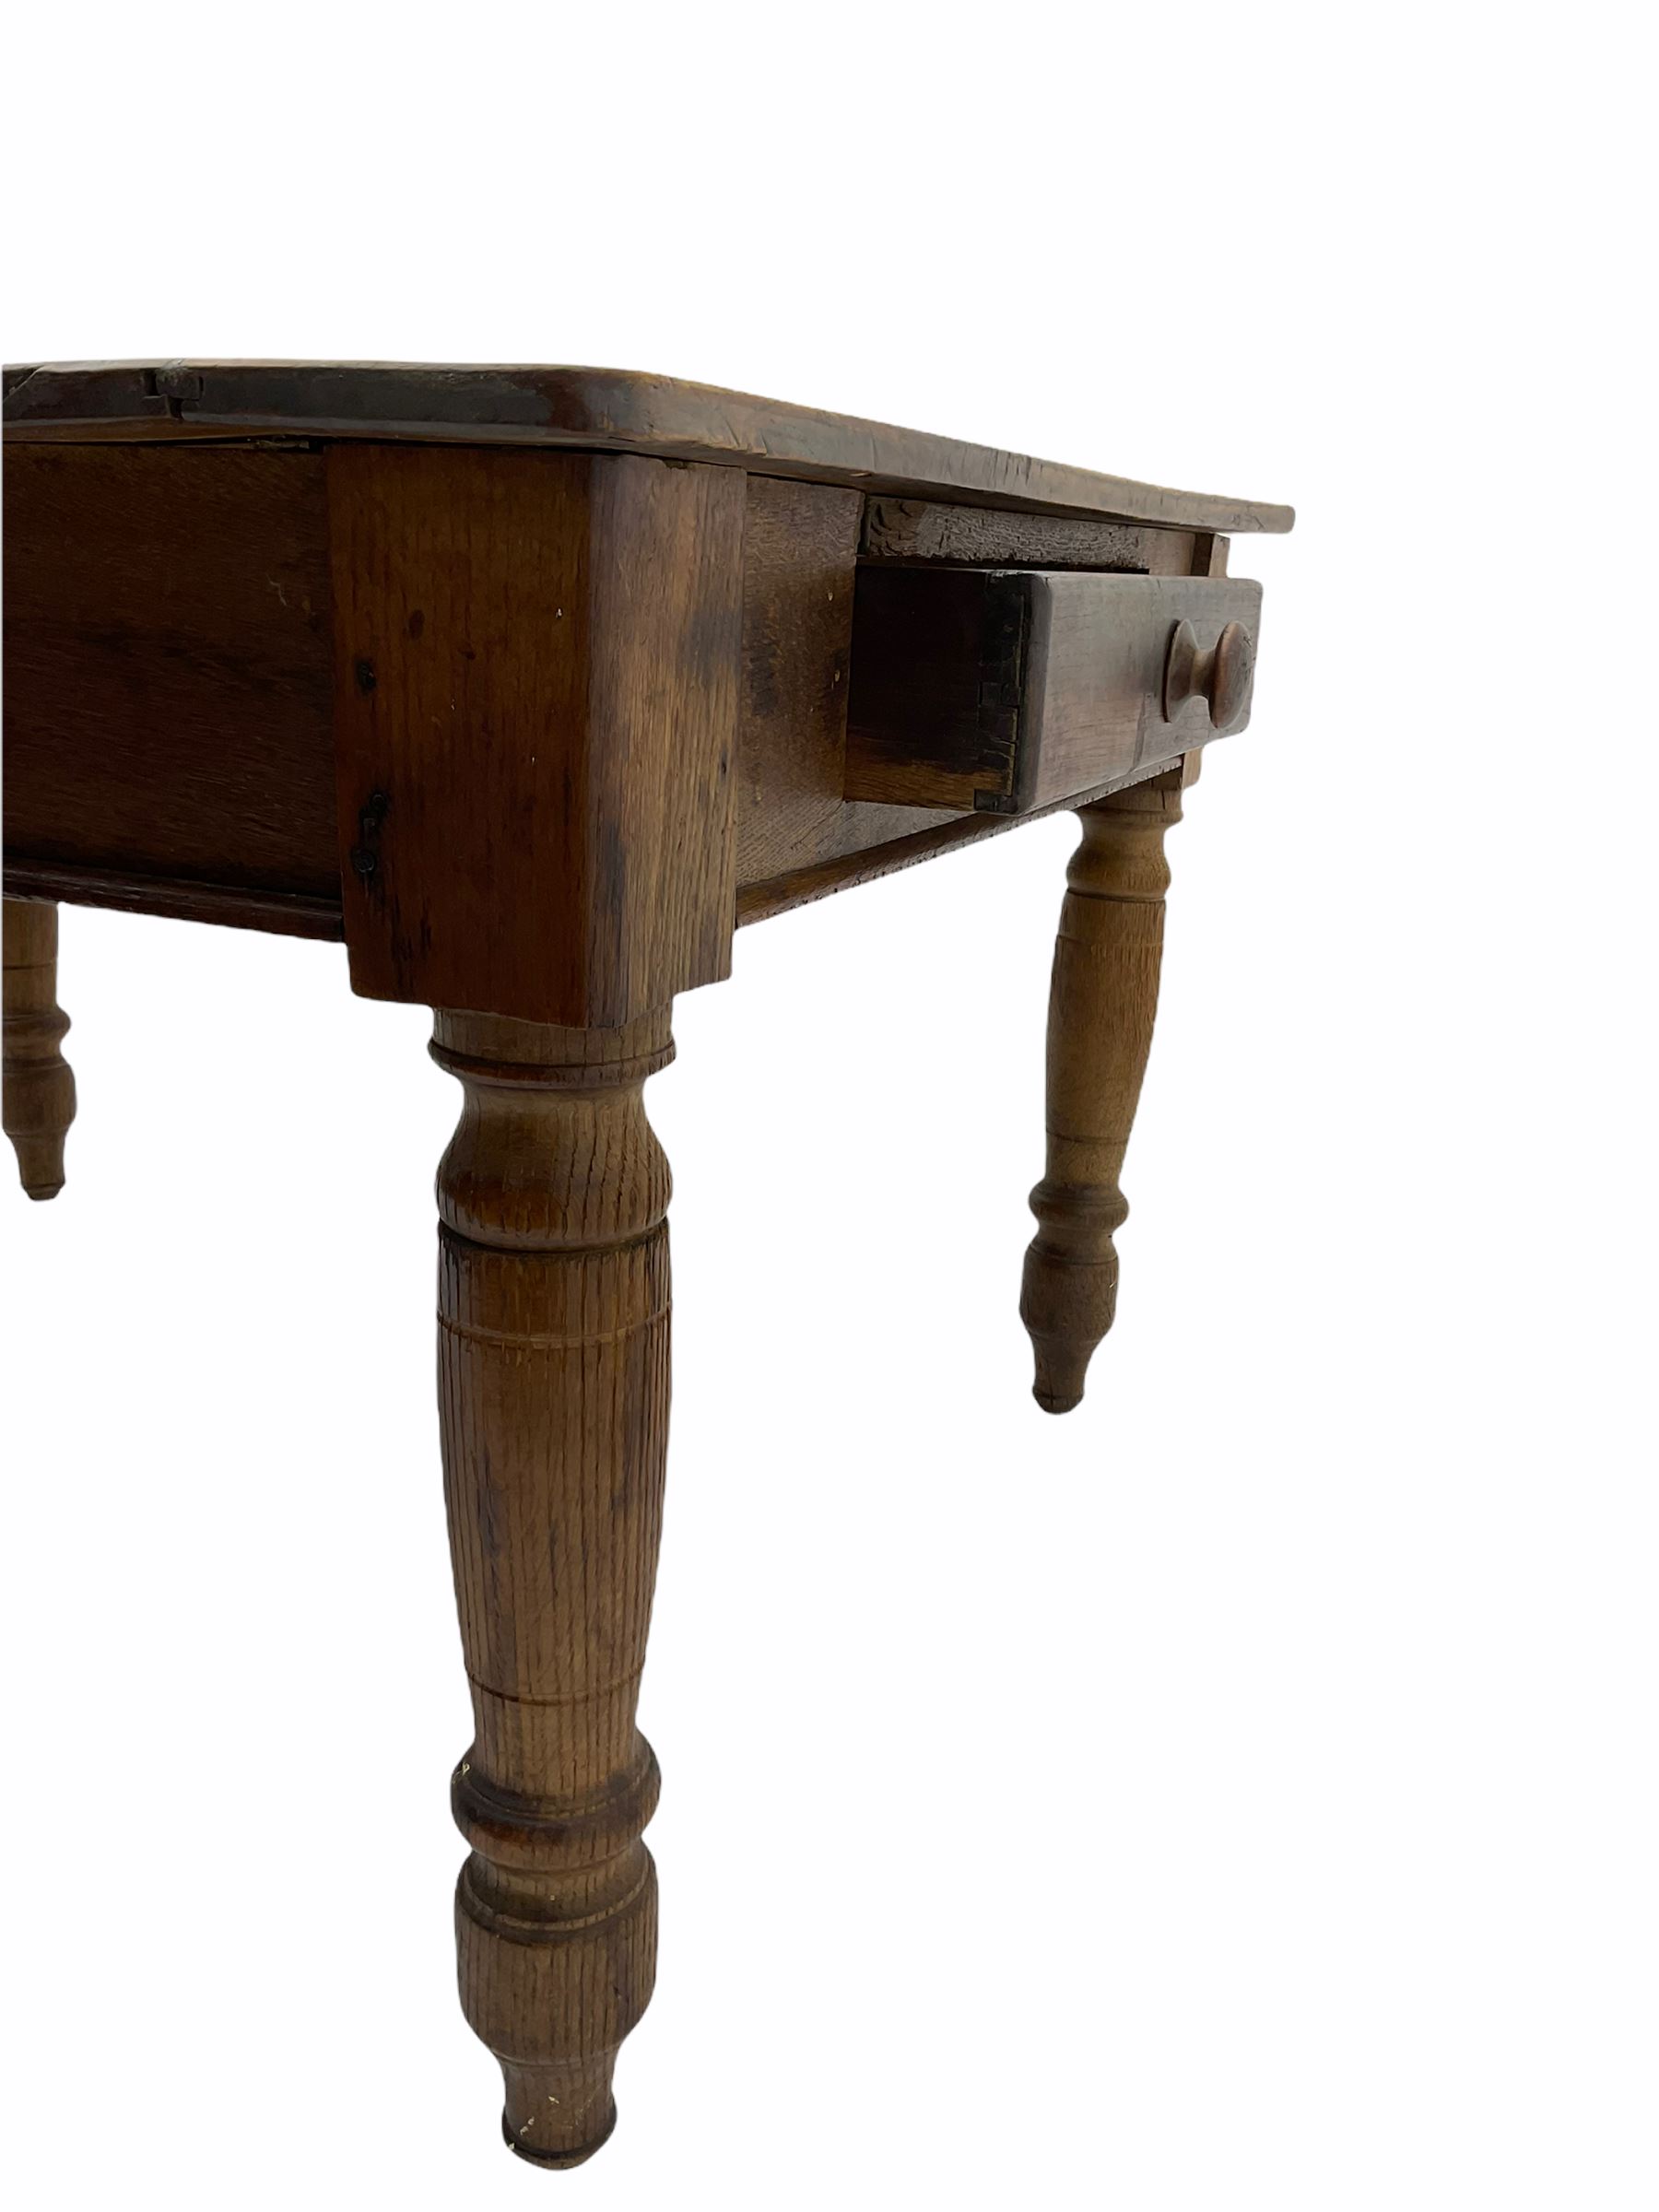 19th century oak and sycamore kitchen table - Image 4 of 8